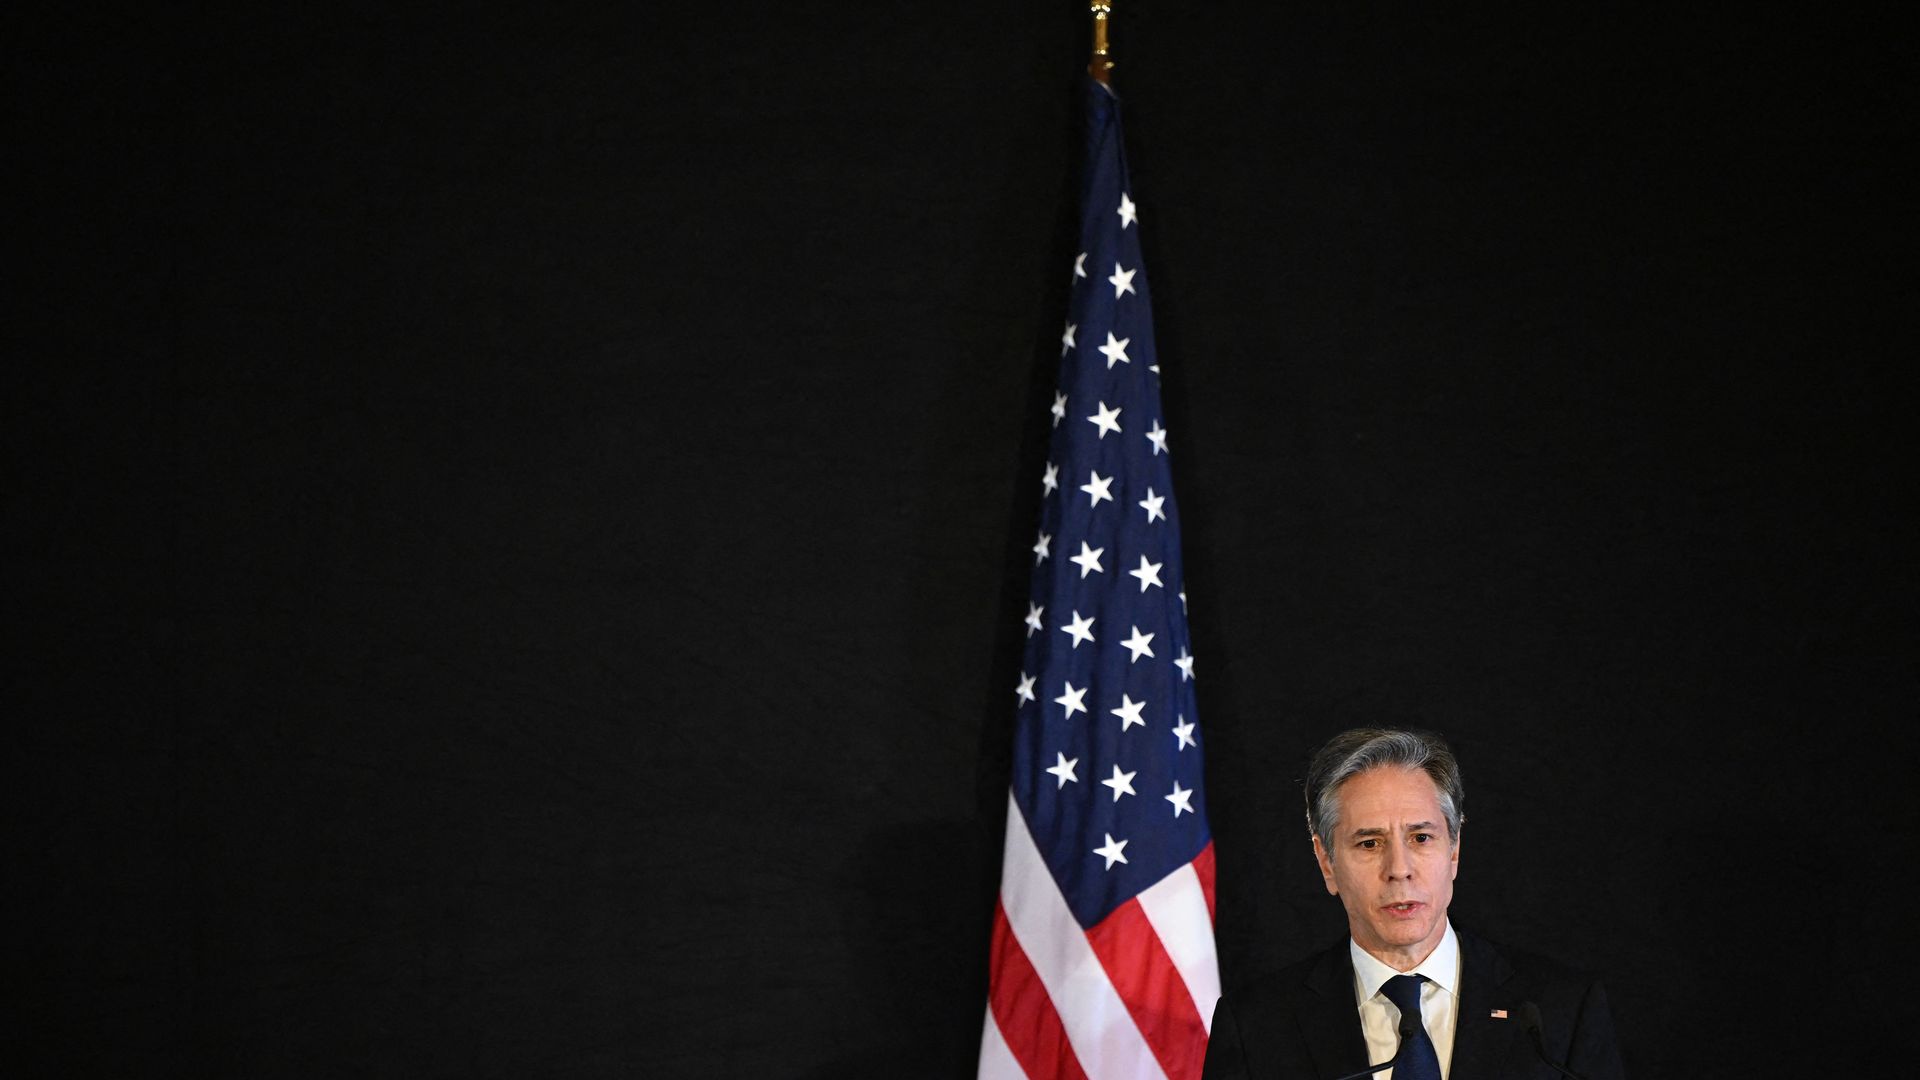 Secretary of State Antony Blinken is seen during a news conference in Geneva.